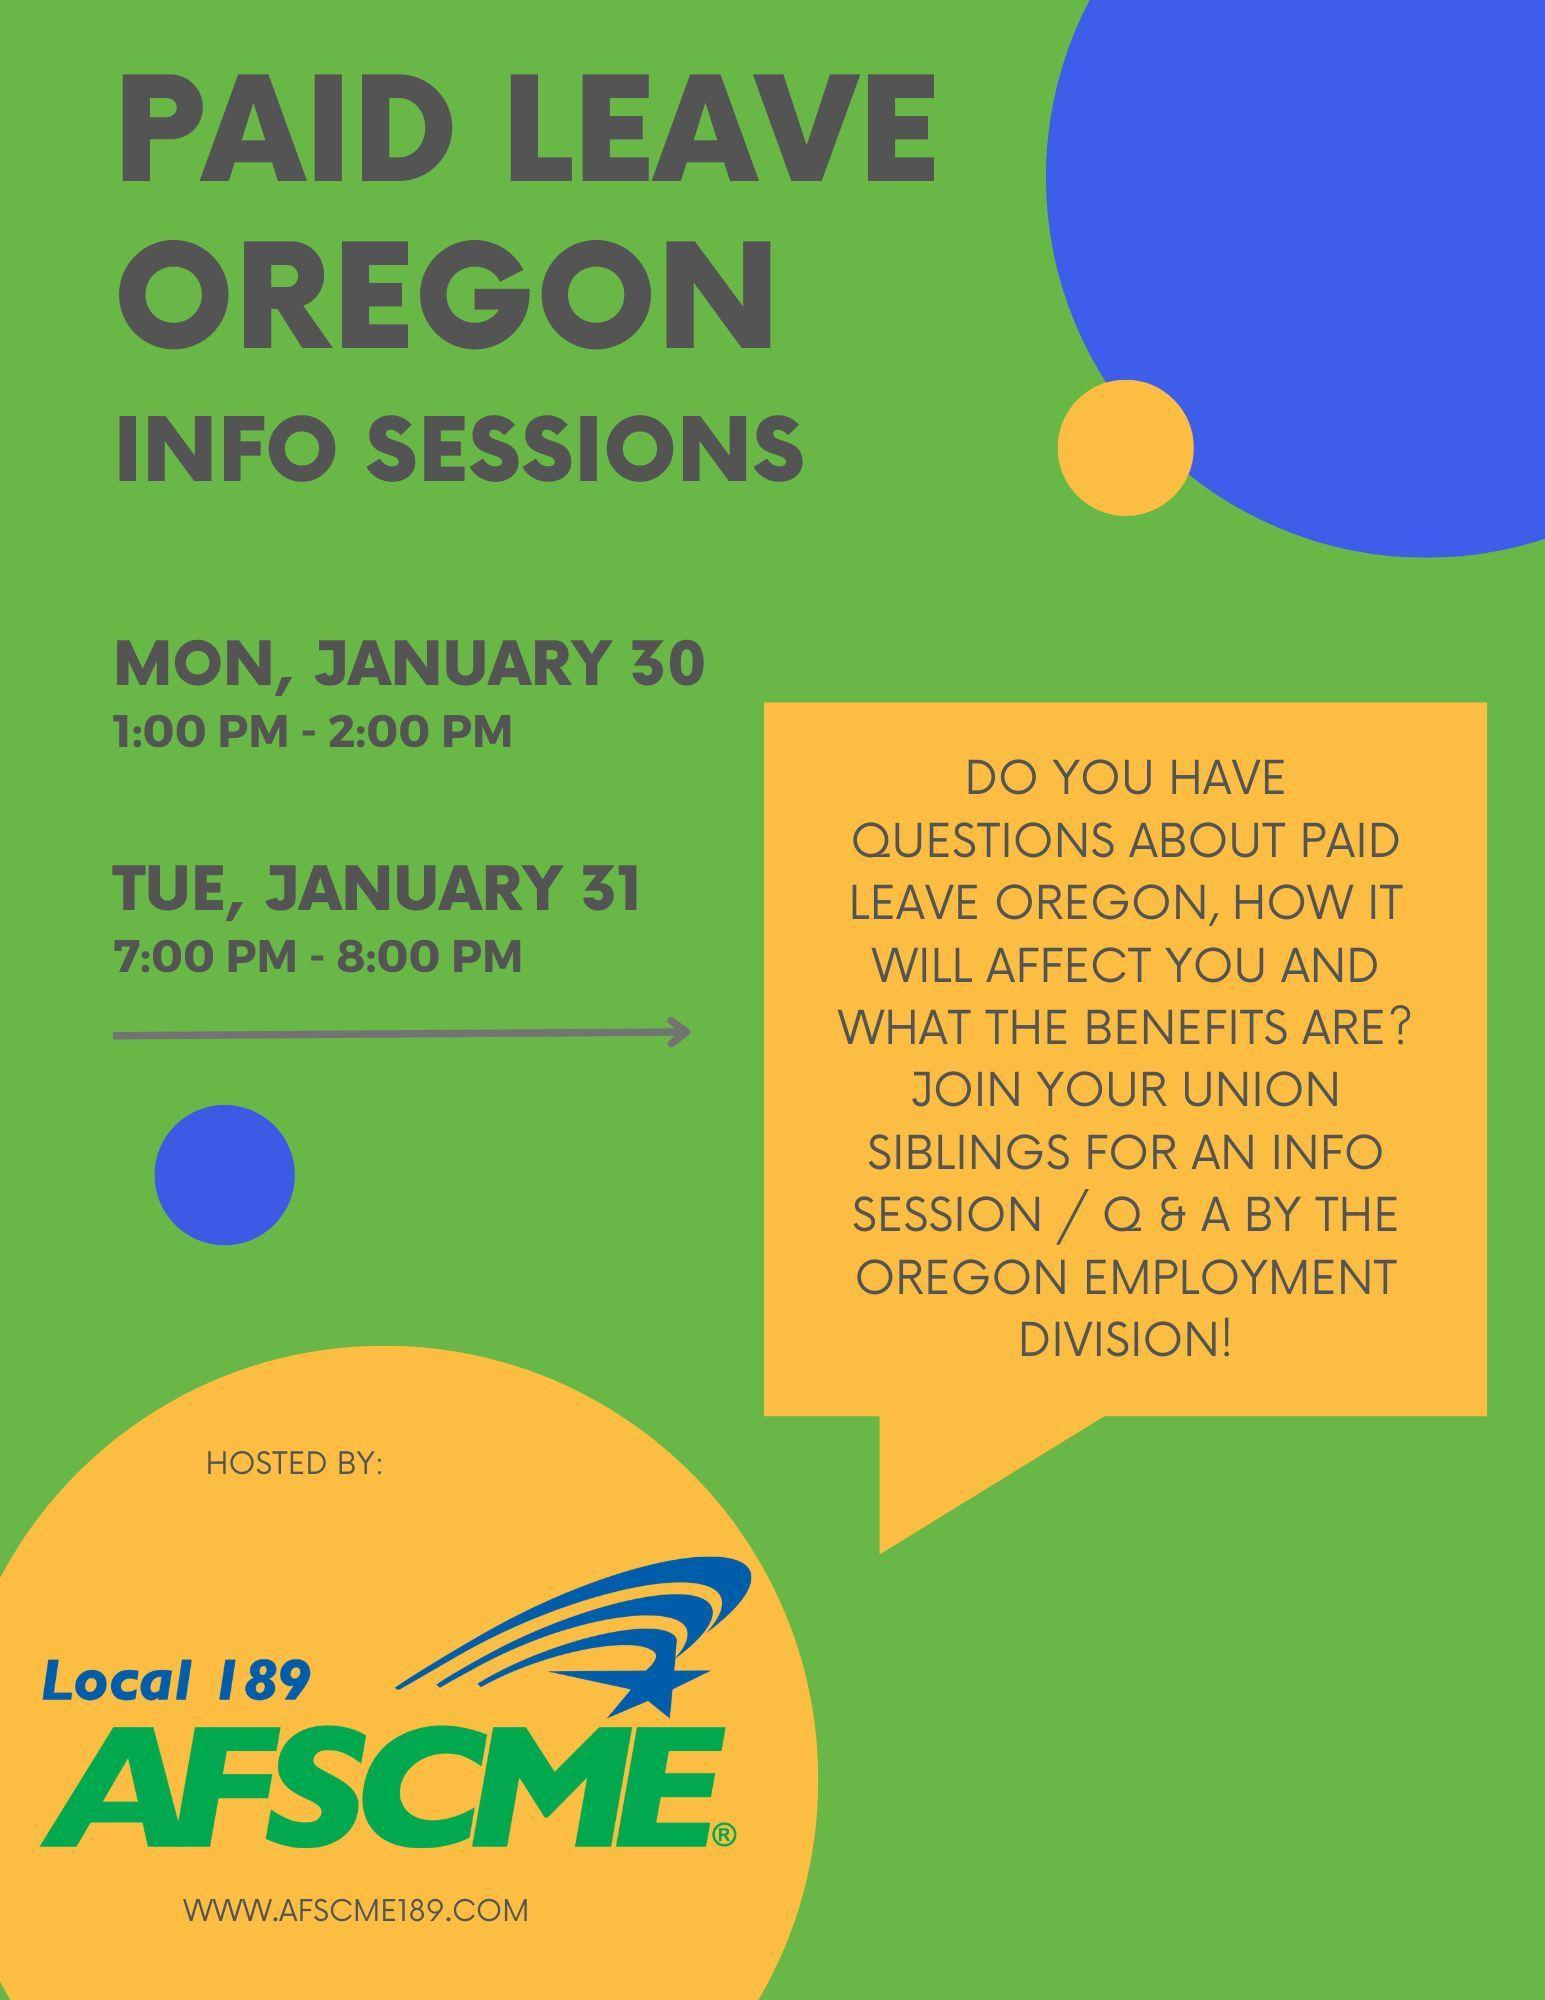 Click this image to attend the 1PM informational session for paid leave oregon on January 30.